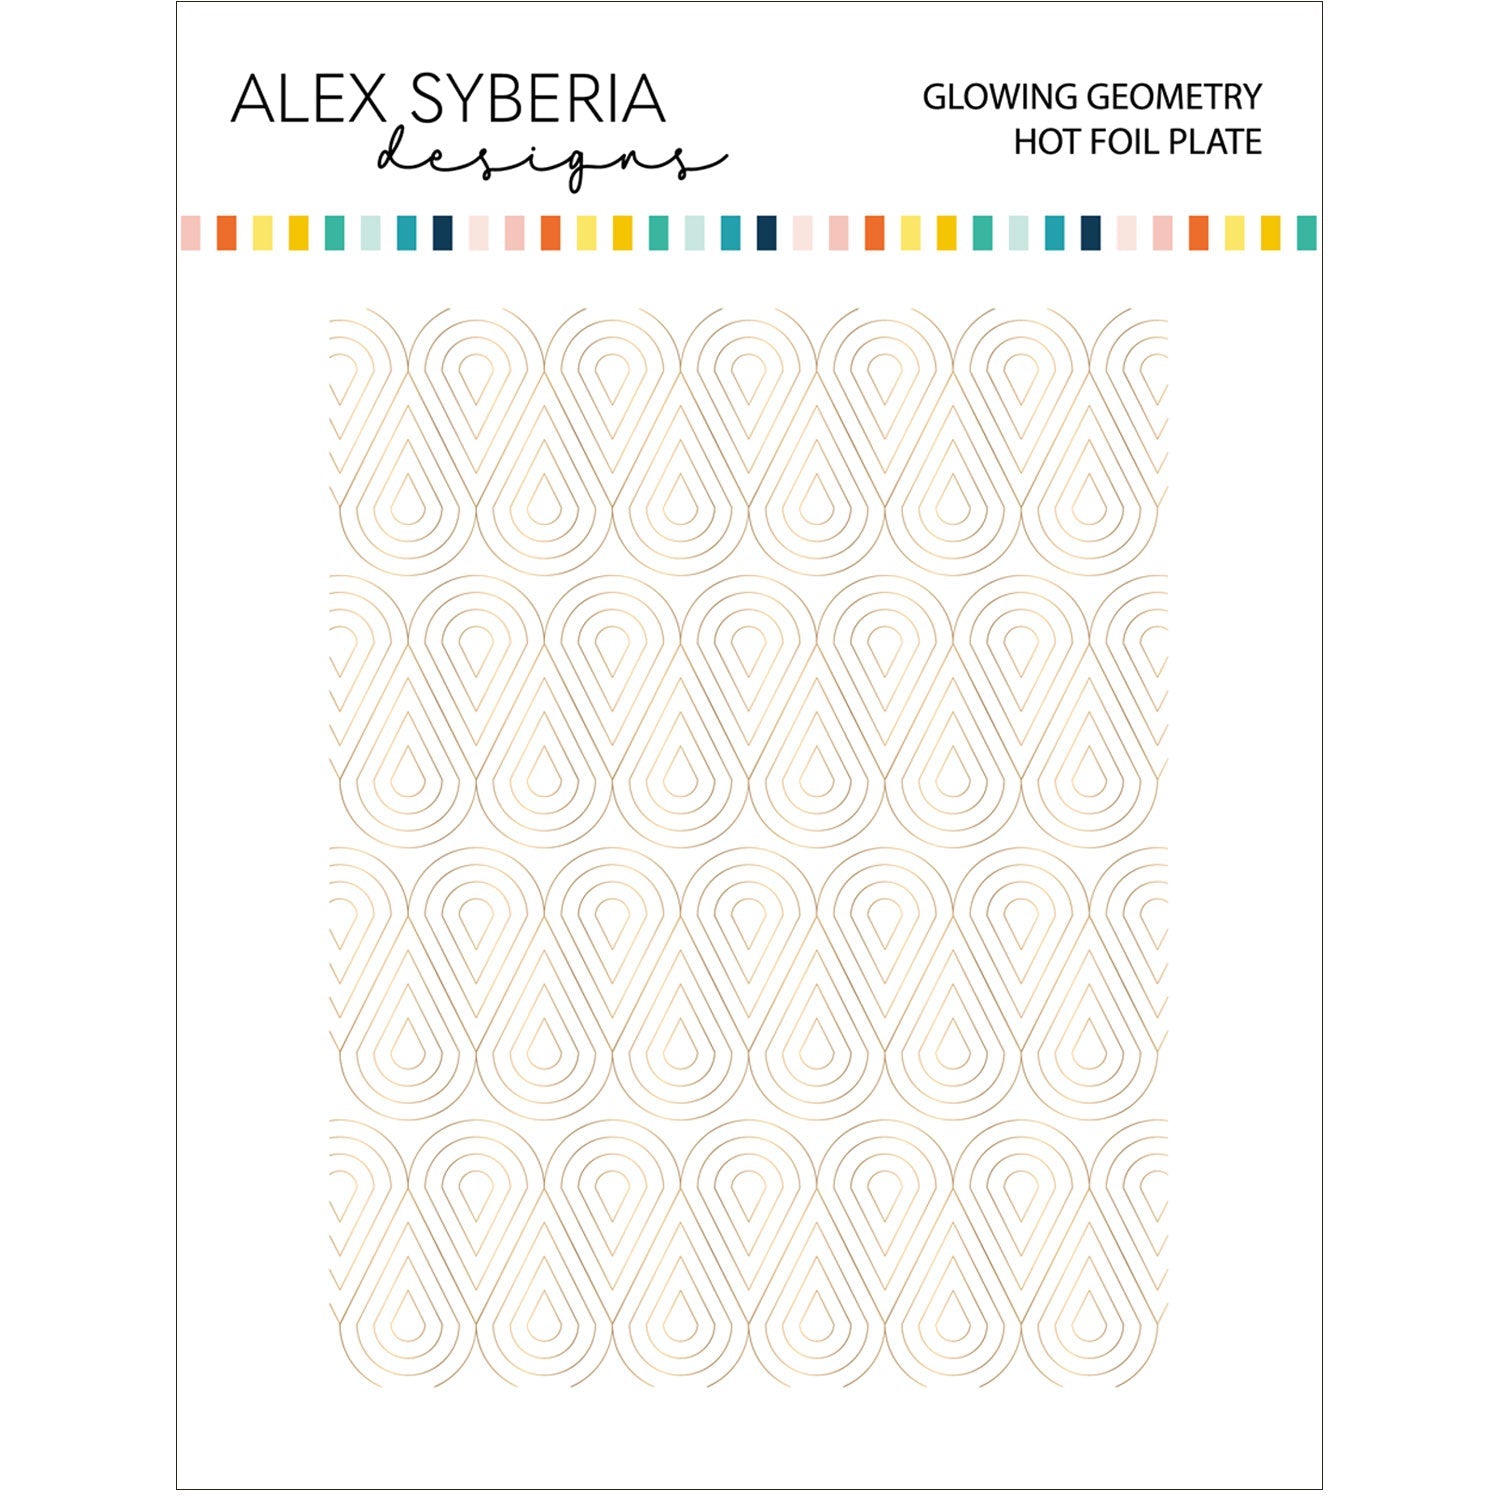 glowing-geometry-hot-foil-plate-cover-die-cardmaking-alex-syberia-designs-hand-made-cards-coordinating-stencils